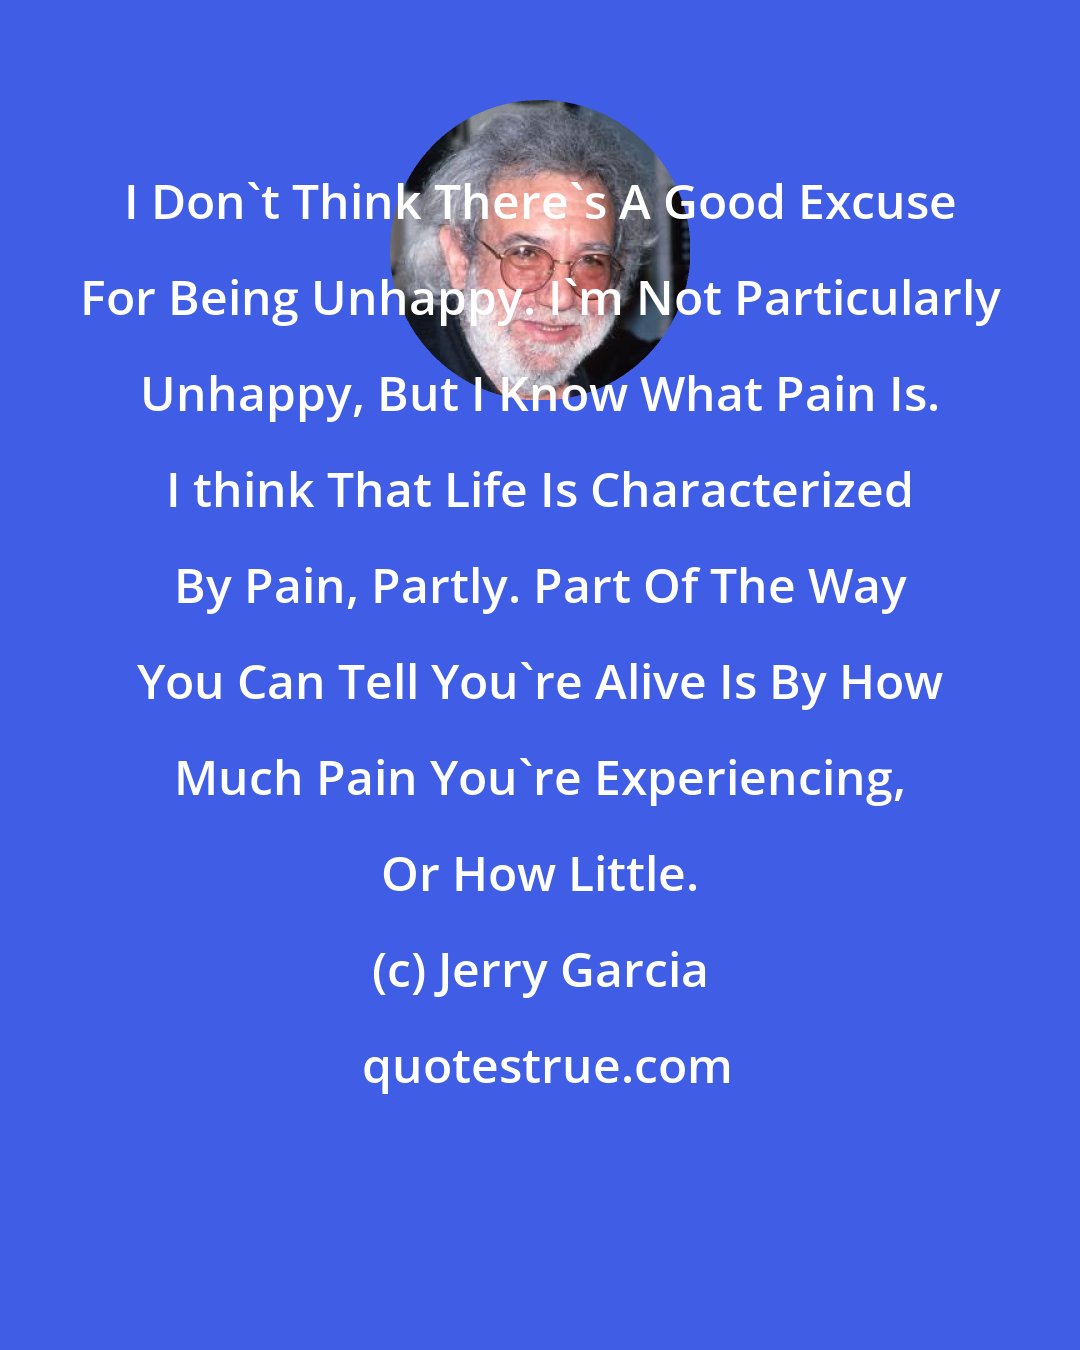 Jerry Garcia: I Don't Think There's A Good Excuse For Being Unhappy. I'm Not Particularly Unhappy, But I Know What Pain Is. I think That Life Is Characterized By Pain, Partly. Part Of The Way You Can Tell You're Alive Is By How Much Pain You're Experiencing, Or How Little.